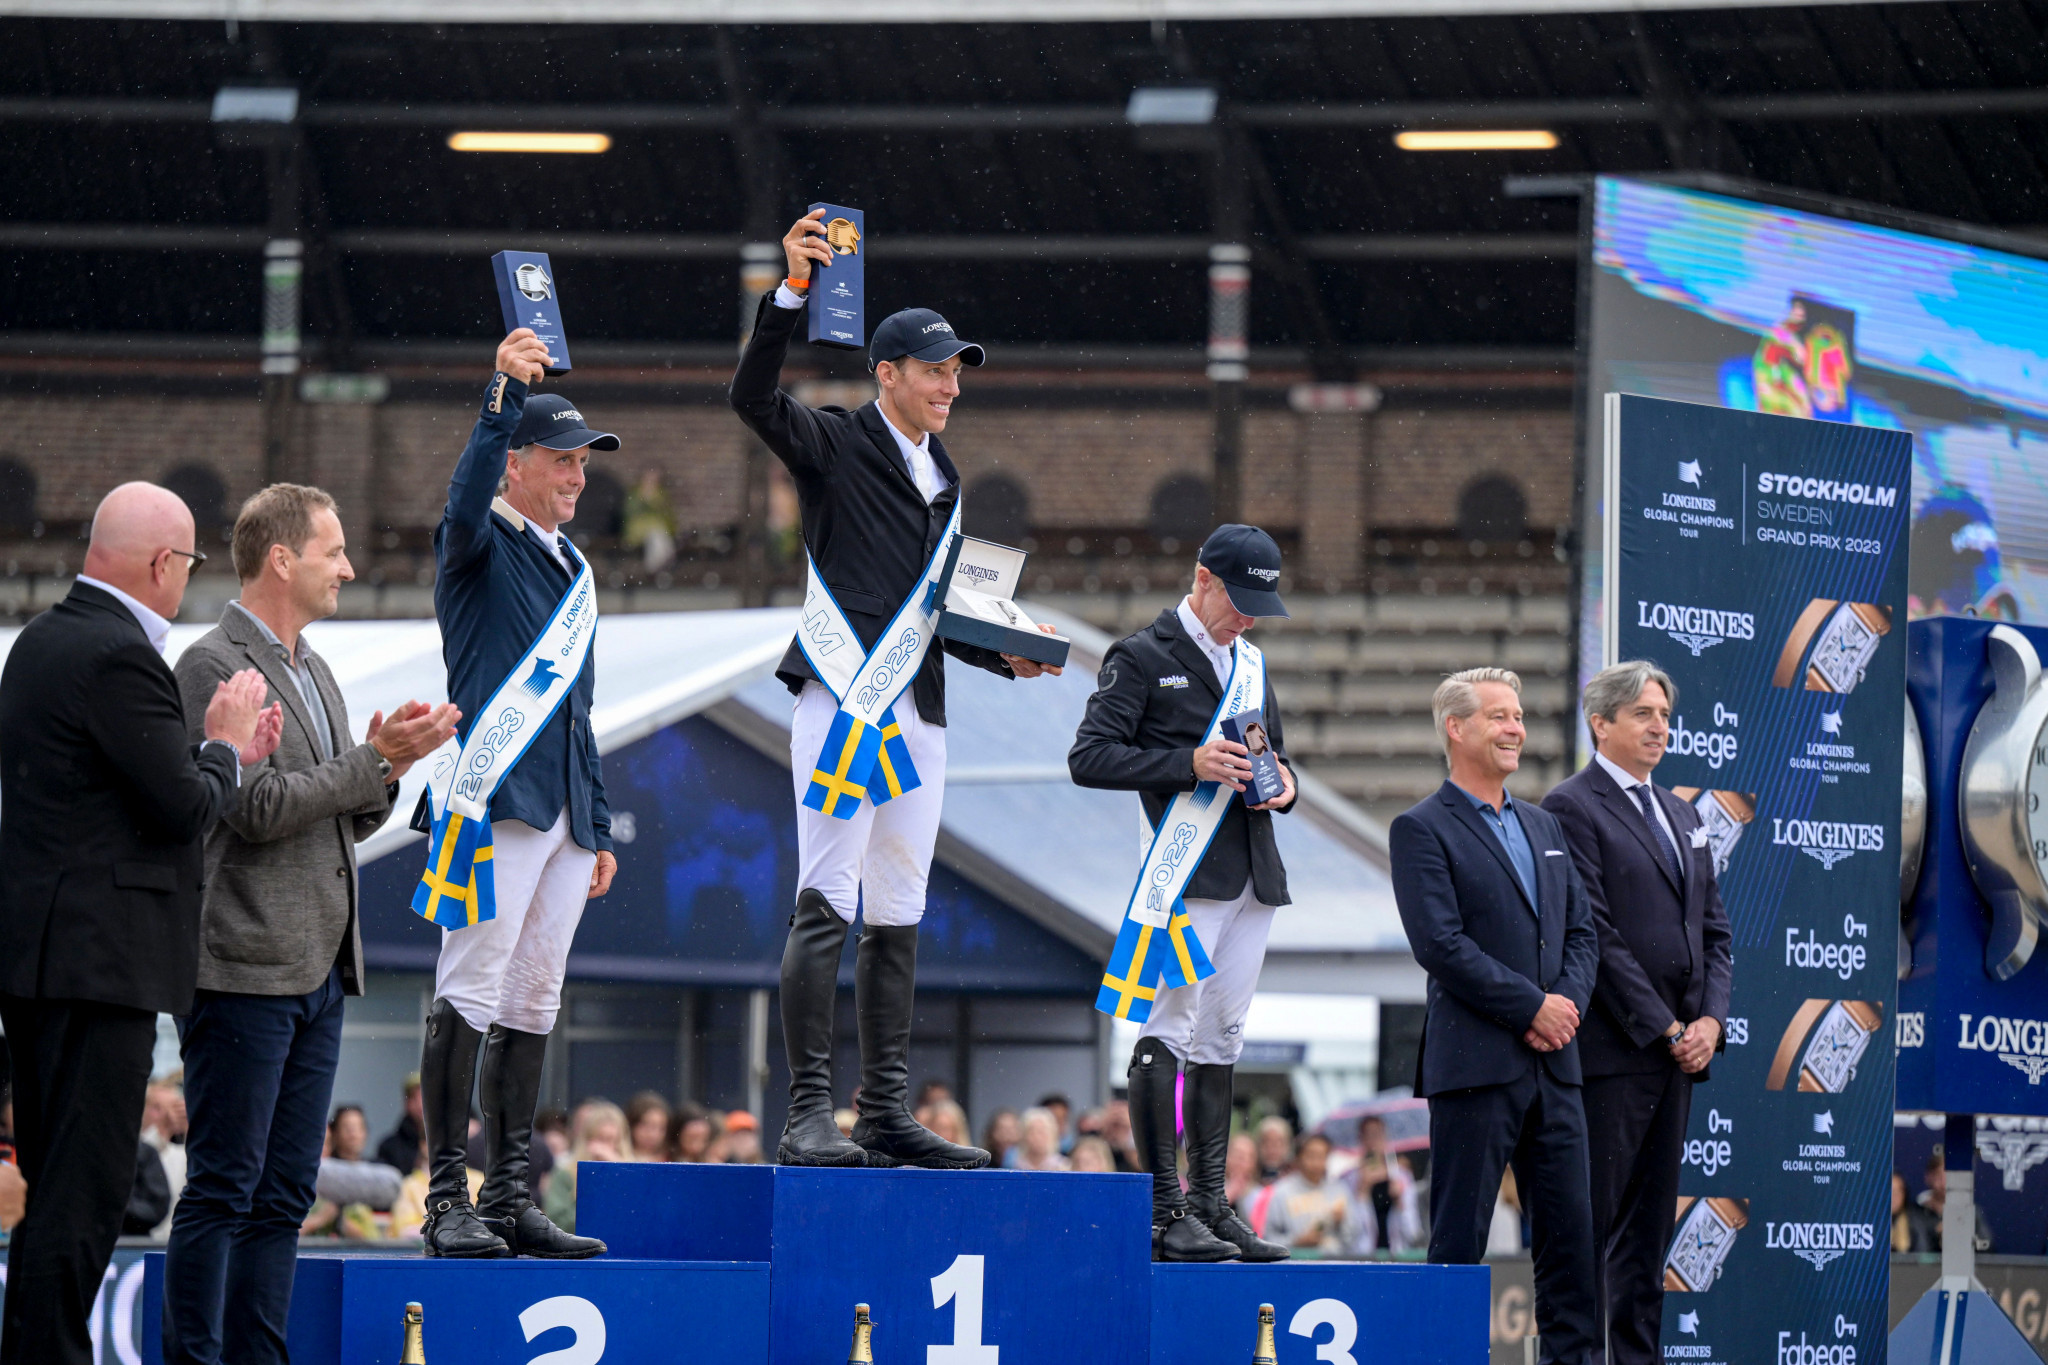 The podium for the Global Champions Tour Grand Prix in Stockholm, won by home rider Henrik von Eckermann ©Global Champions Tour